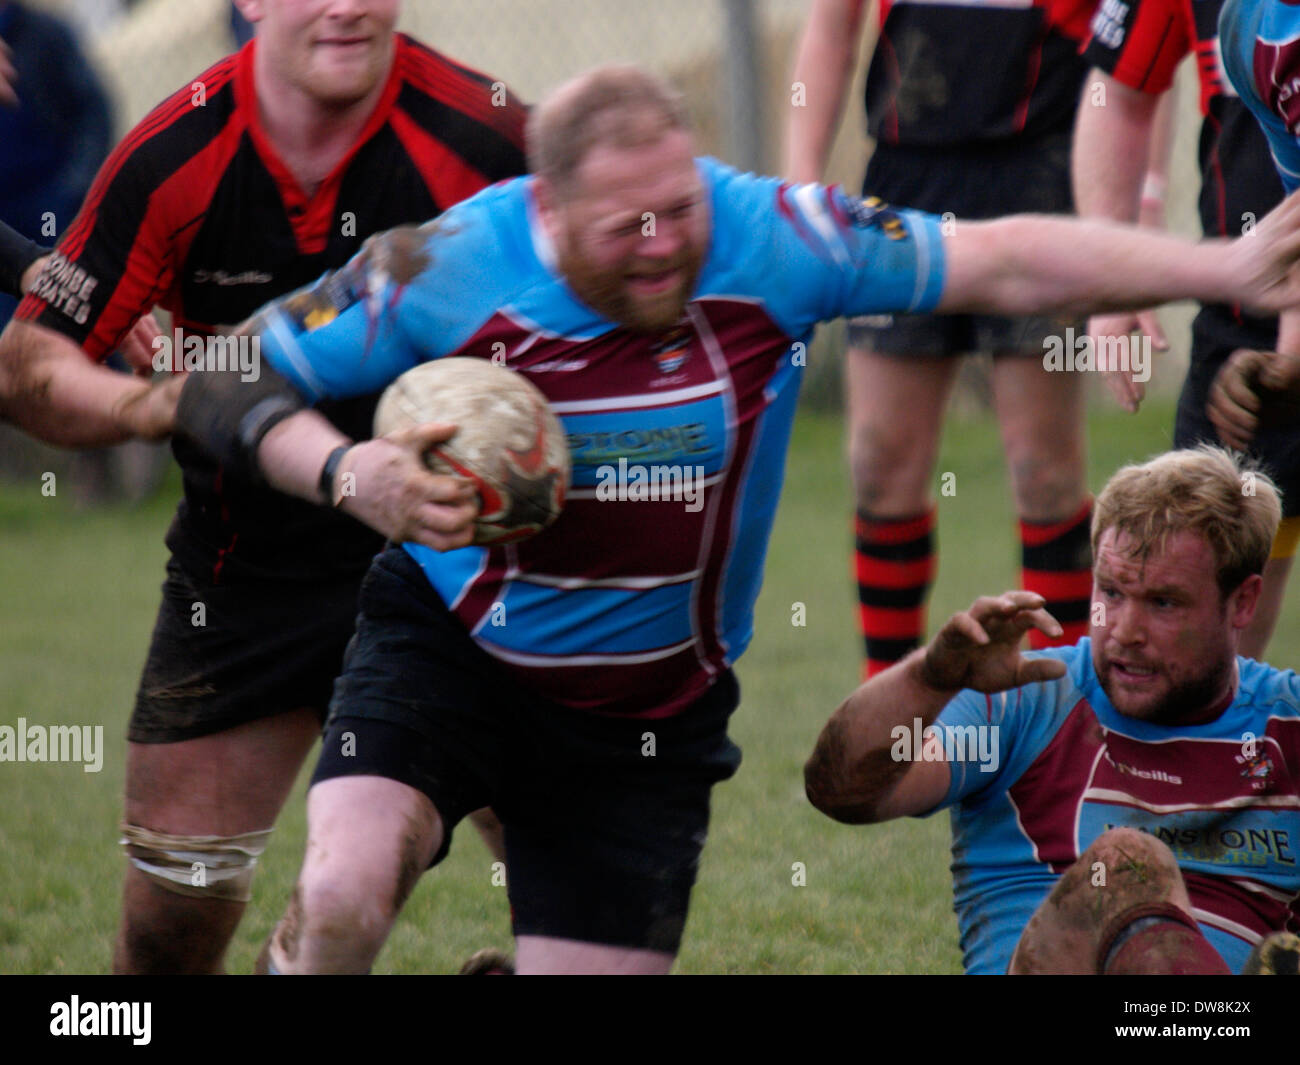 Large forward rugby player charging forward, with motion blur, Bude, Cornwall, UK Stock Photo